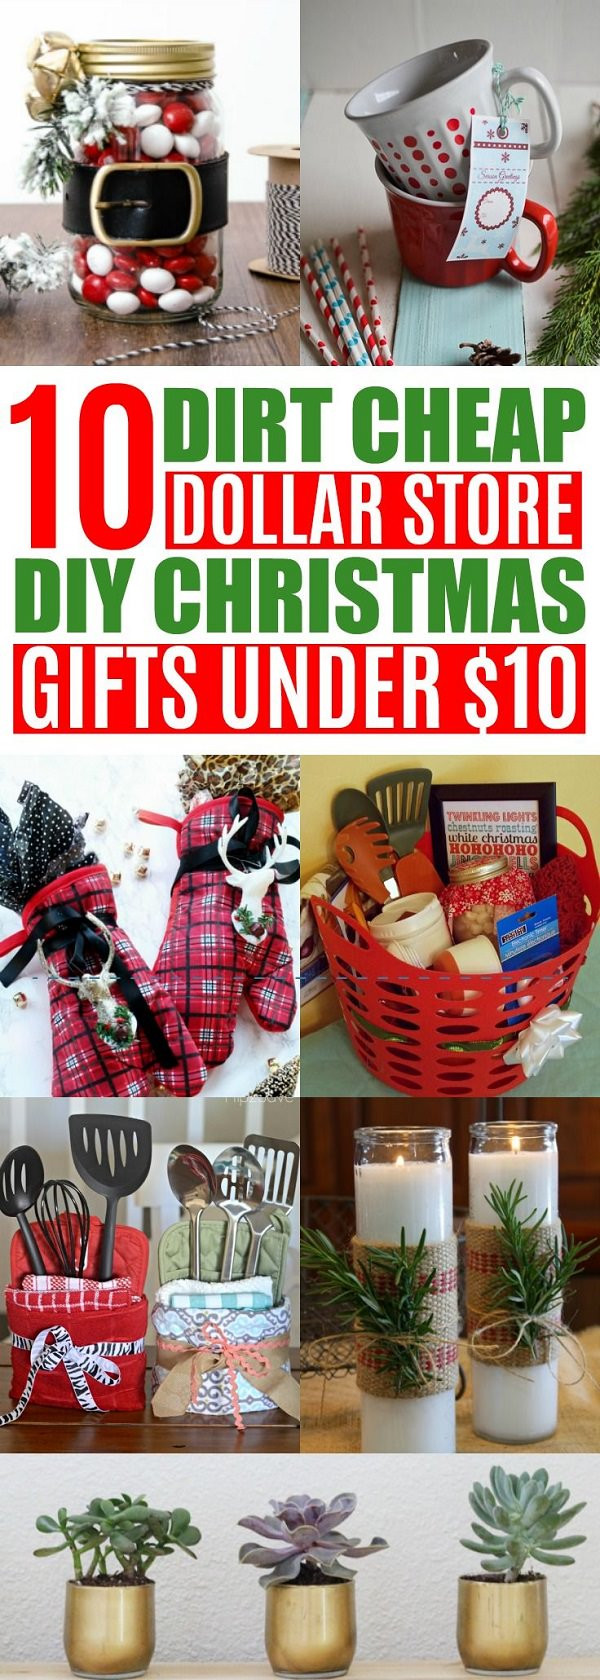 Ideas For Christmas Gift Baskets Inexpensive
 10 DIY Cheap Christmas Gift Ideas From the Dollar Store